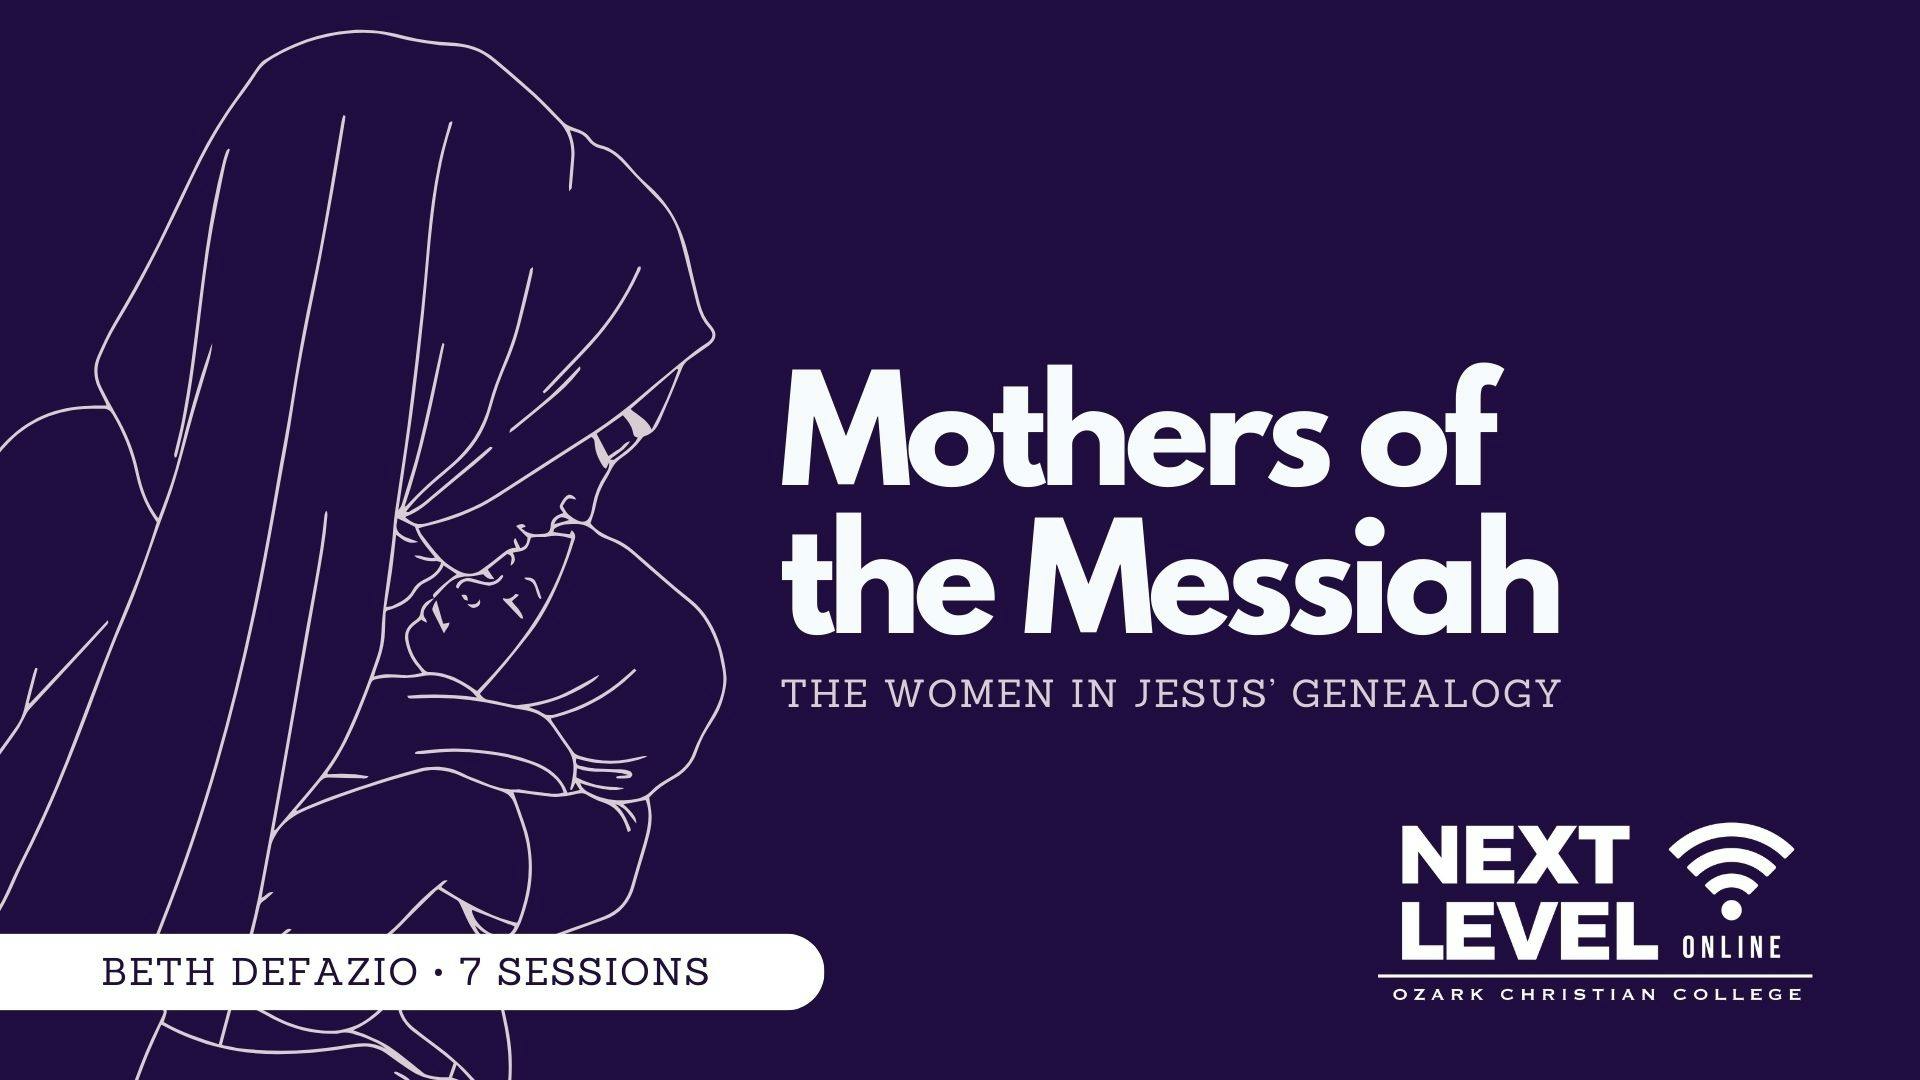 Mothers of the Messiah